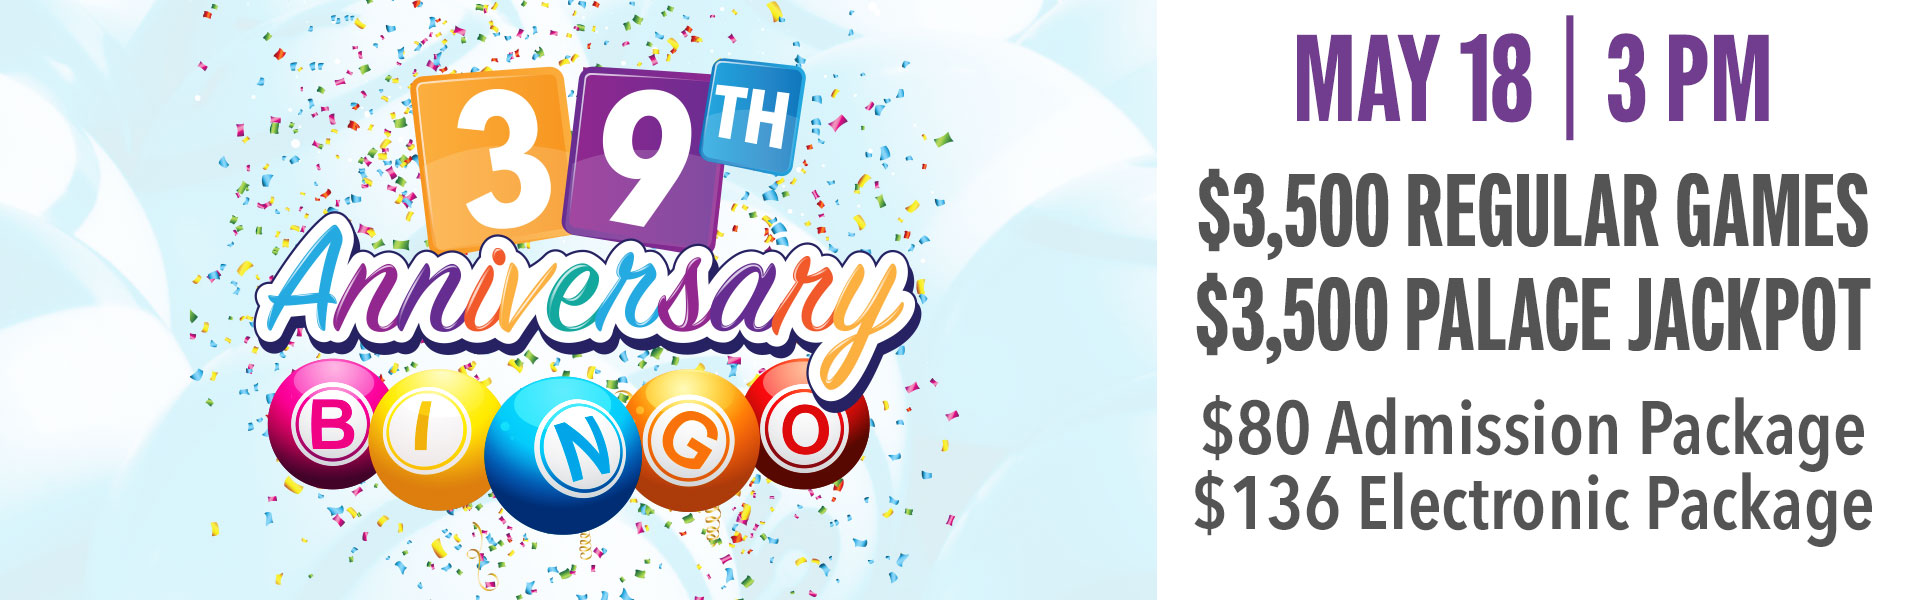 T'S OUR 39TH ANNIVERSARY BINGO SPECIAL! $3,500 regular games $3,500 Palace Jackpot All specials pay 50% of sales!